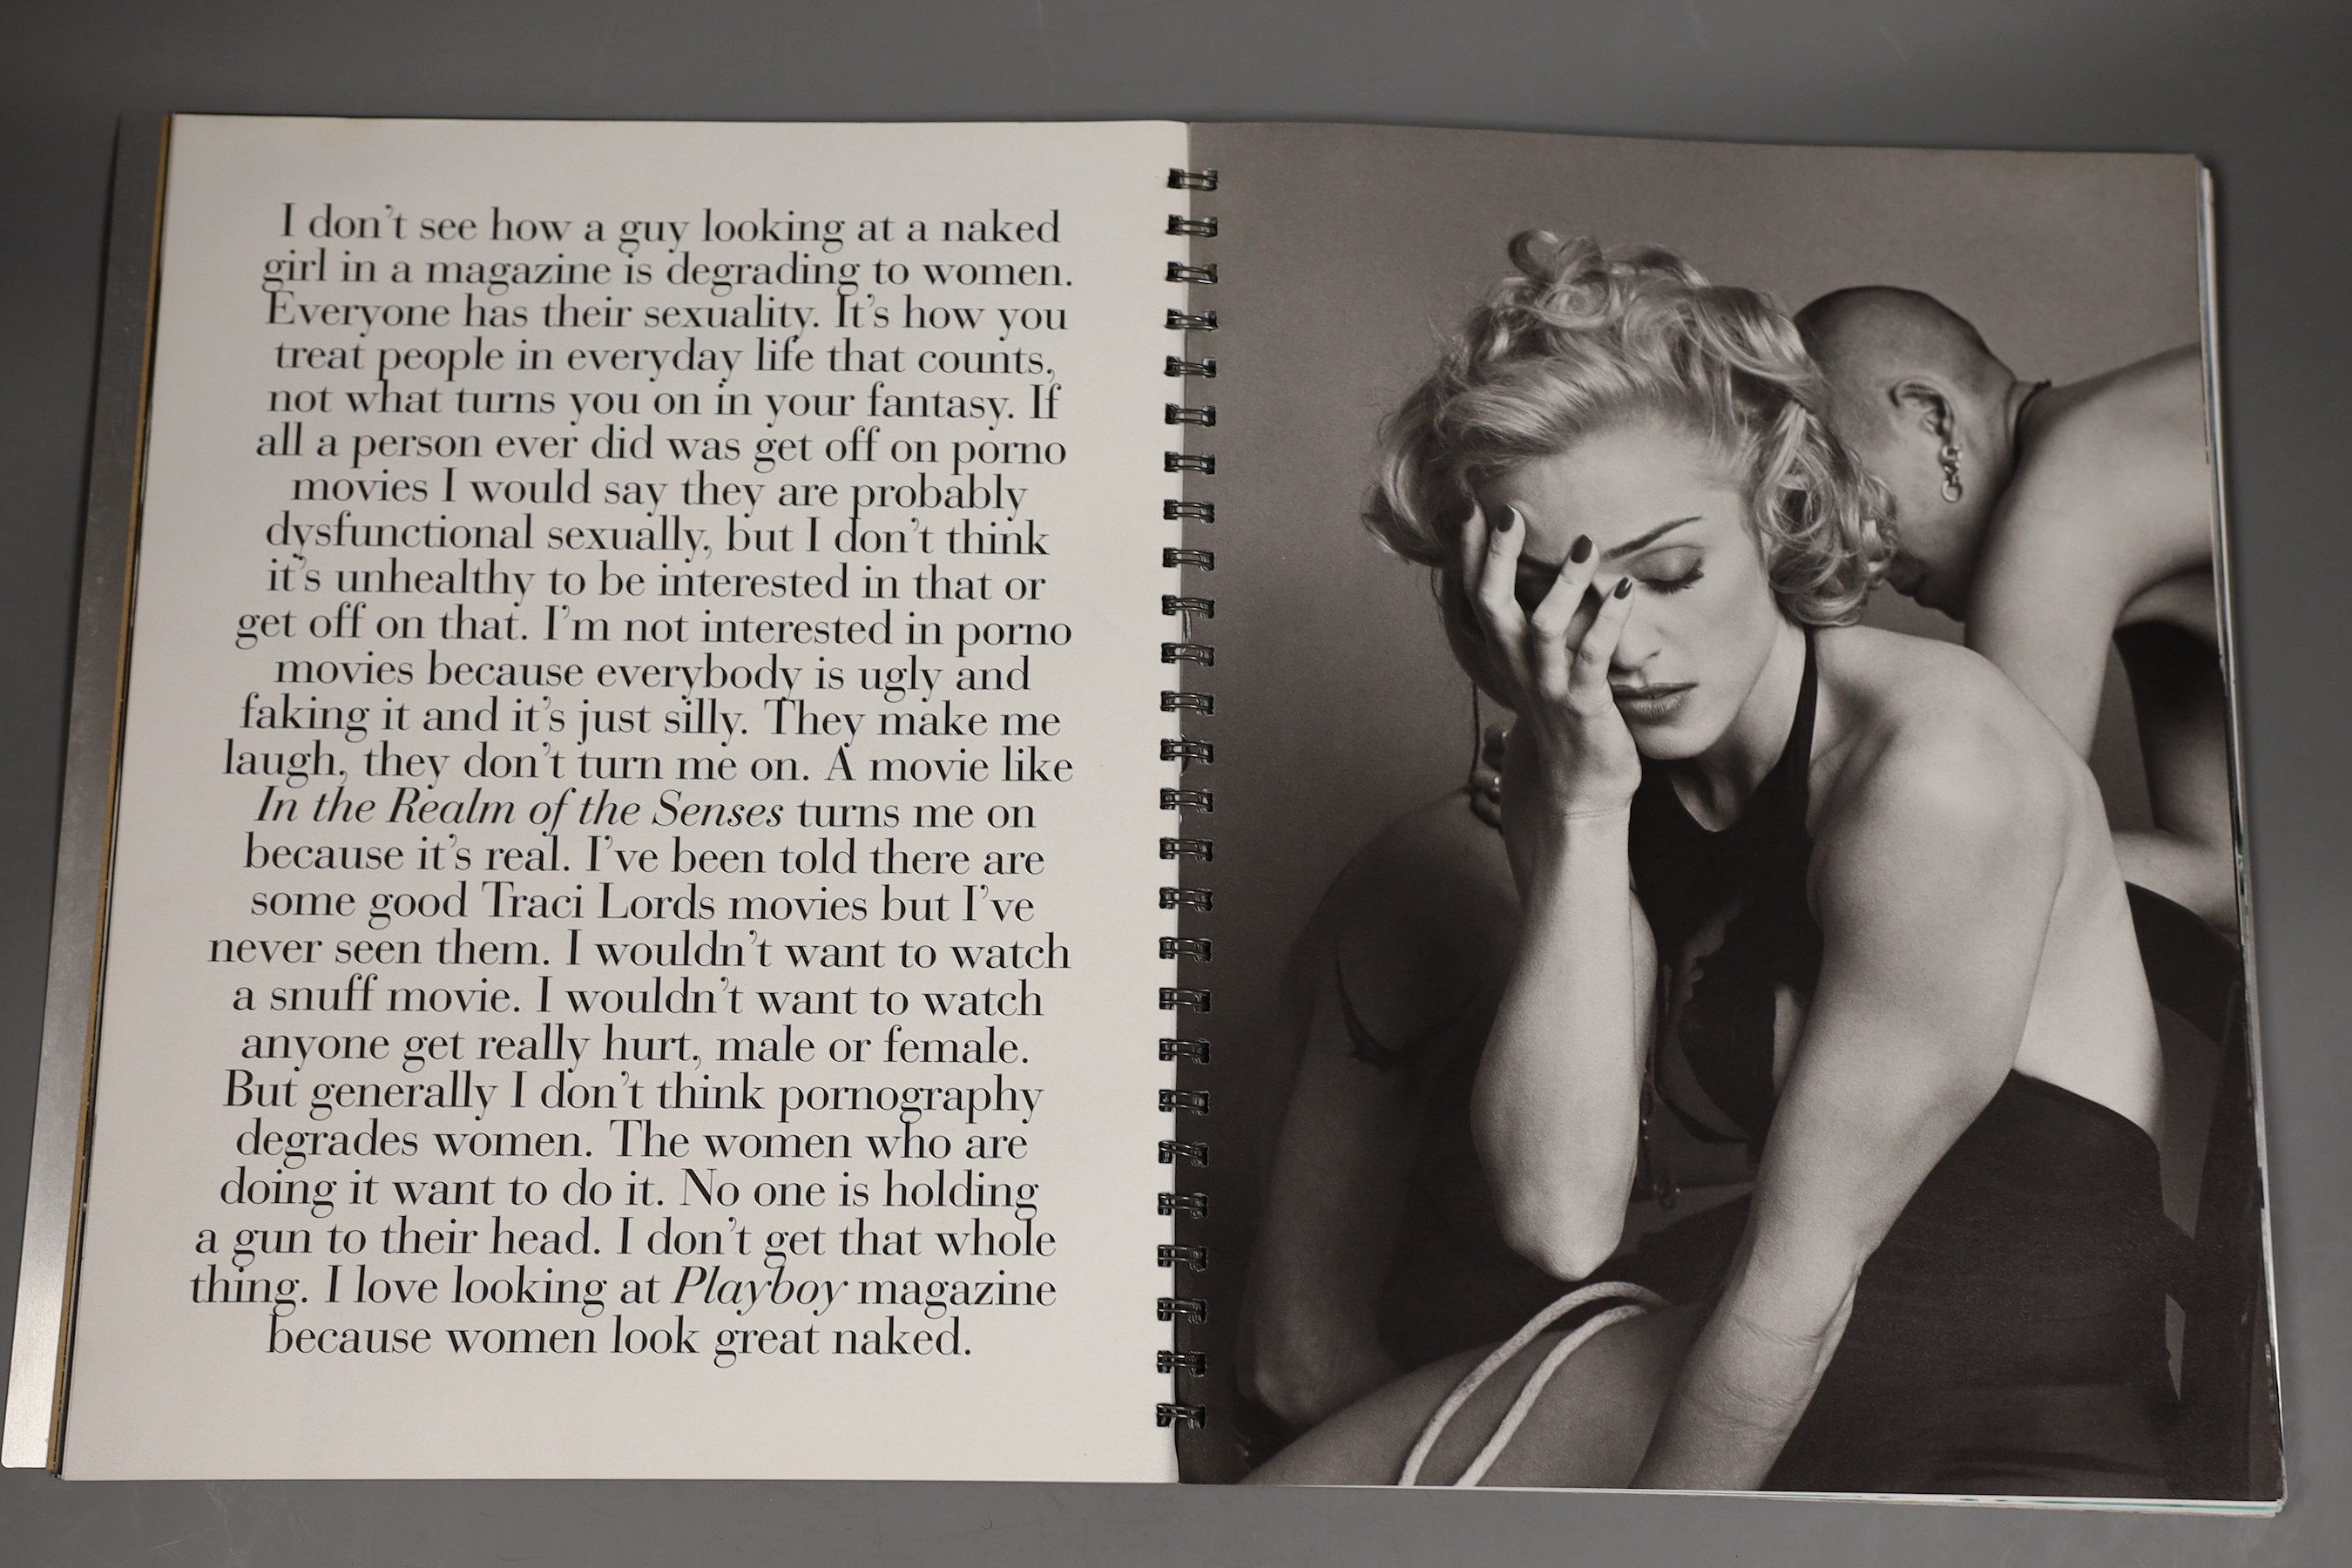 'Sex', by Madonna, photographed by Steven Meisel, art directed by Fabien Baron, edited by Glenn O’Brien, Produced by Callaway, Published by Martin Secker & Warburg